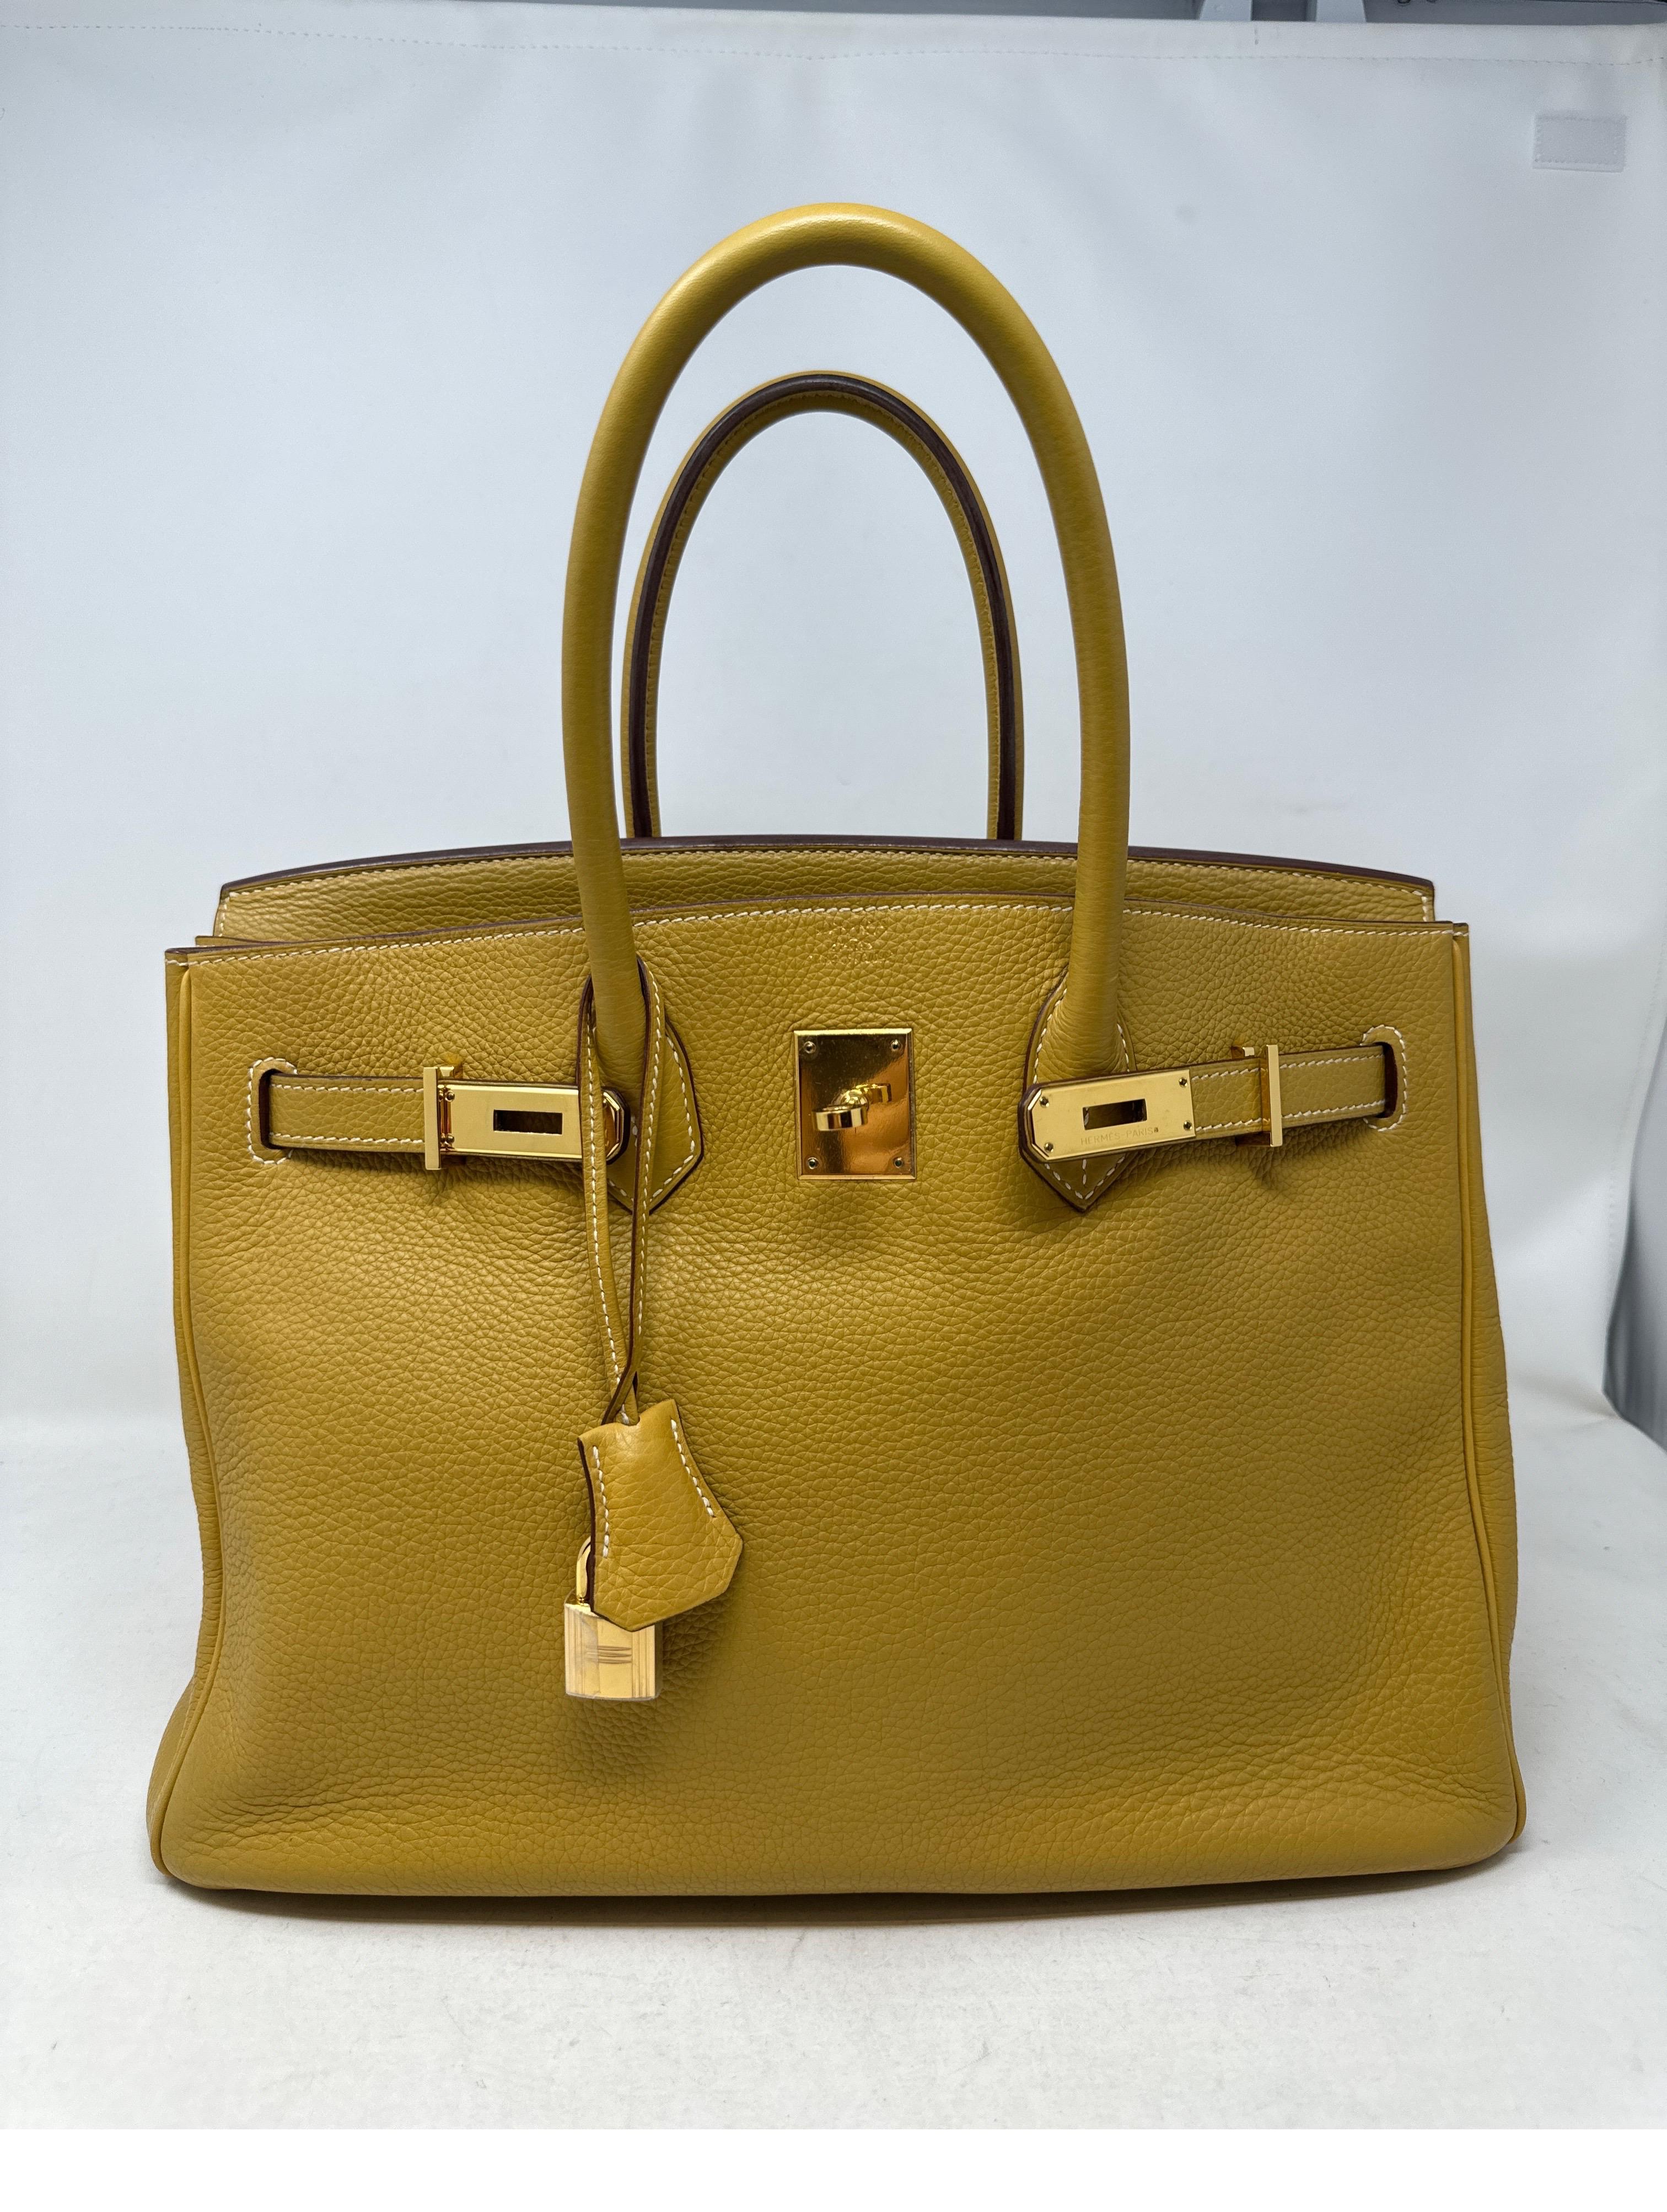 Hermes Curry Yellow Birkin Bag. Very good condition. Gold hardware. Clemence leather. Interior clean. Light yellow neutral color. Includes clochette, lock, keys, and dust bag. Guaranteed authentic. 